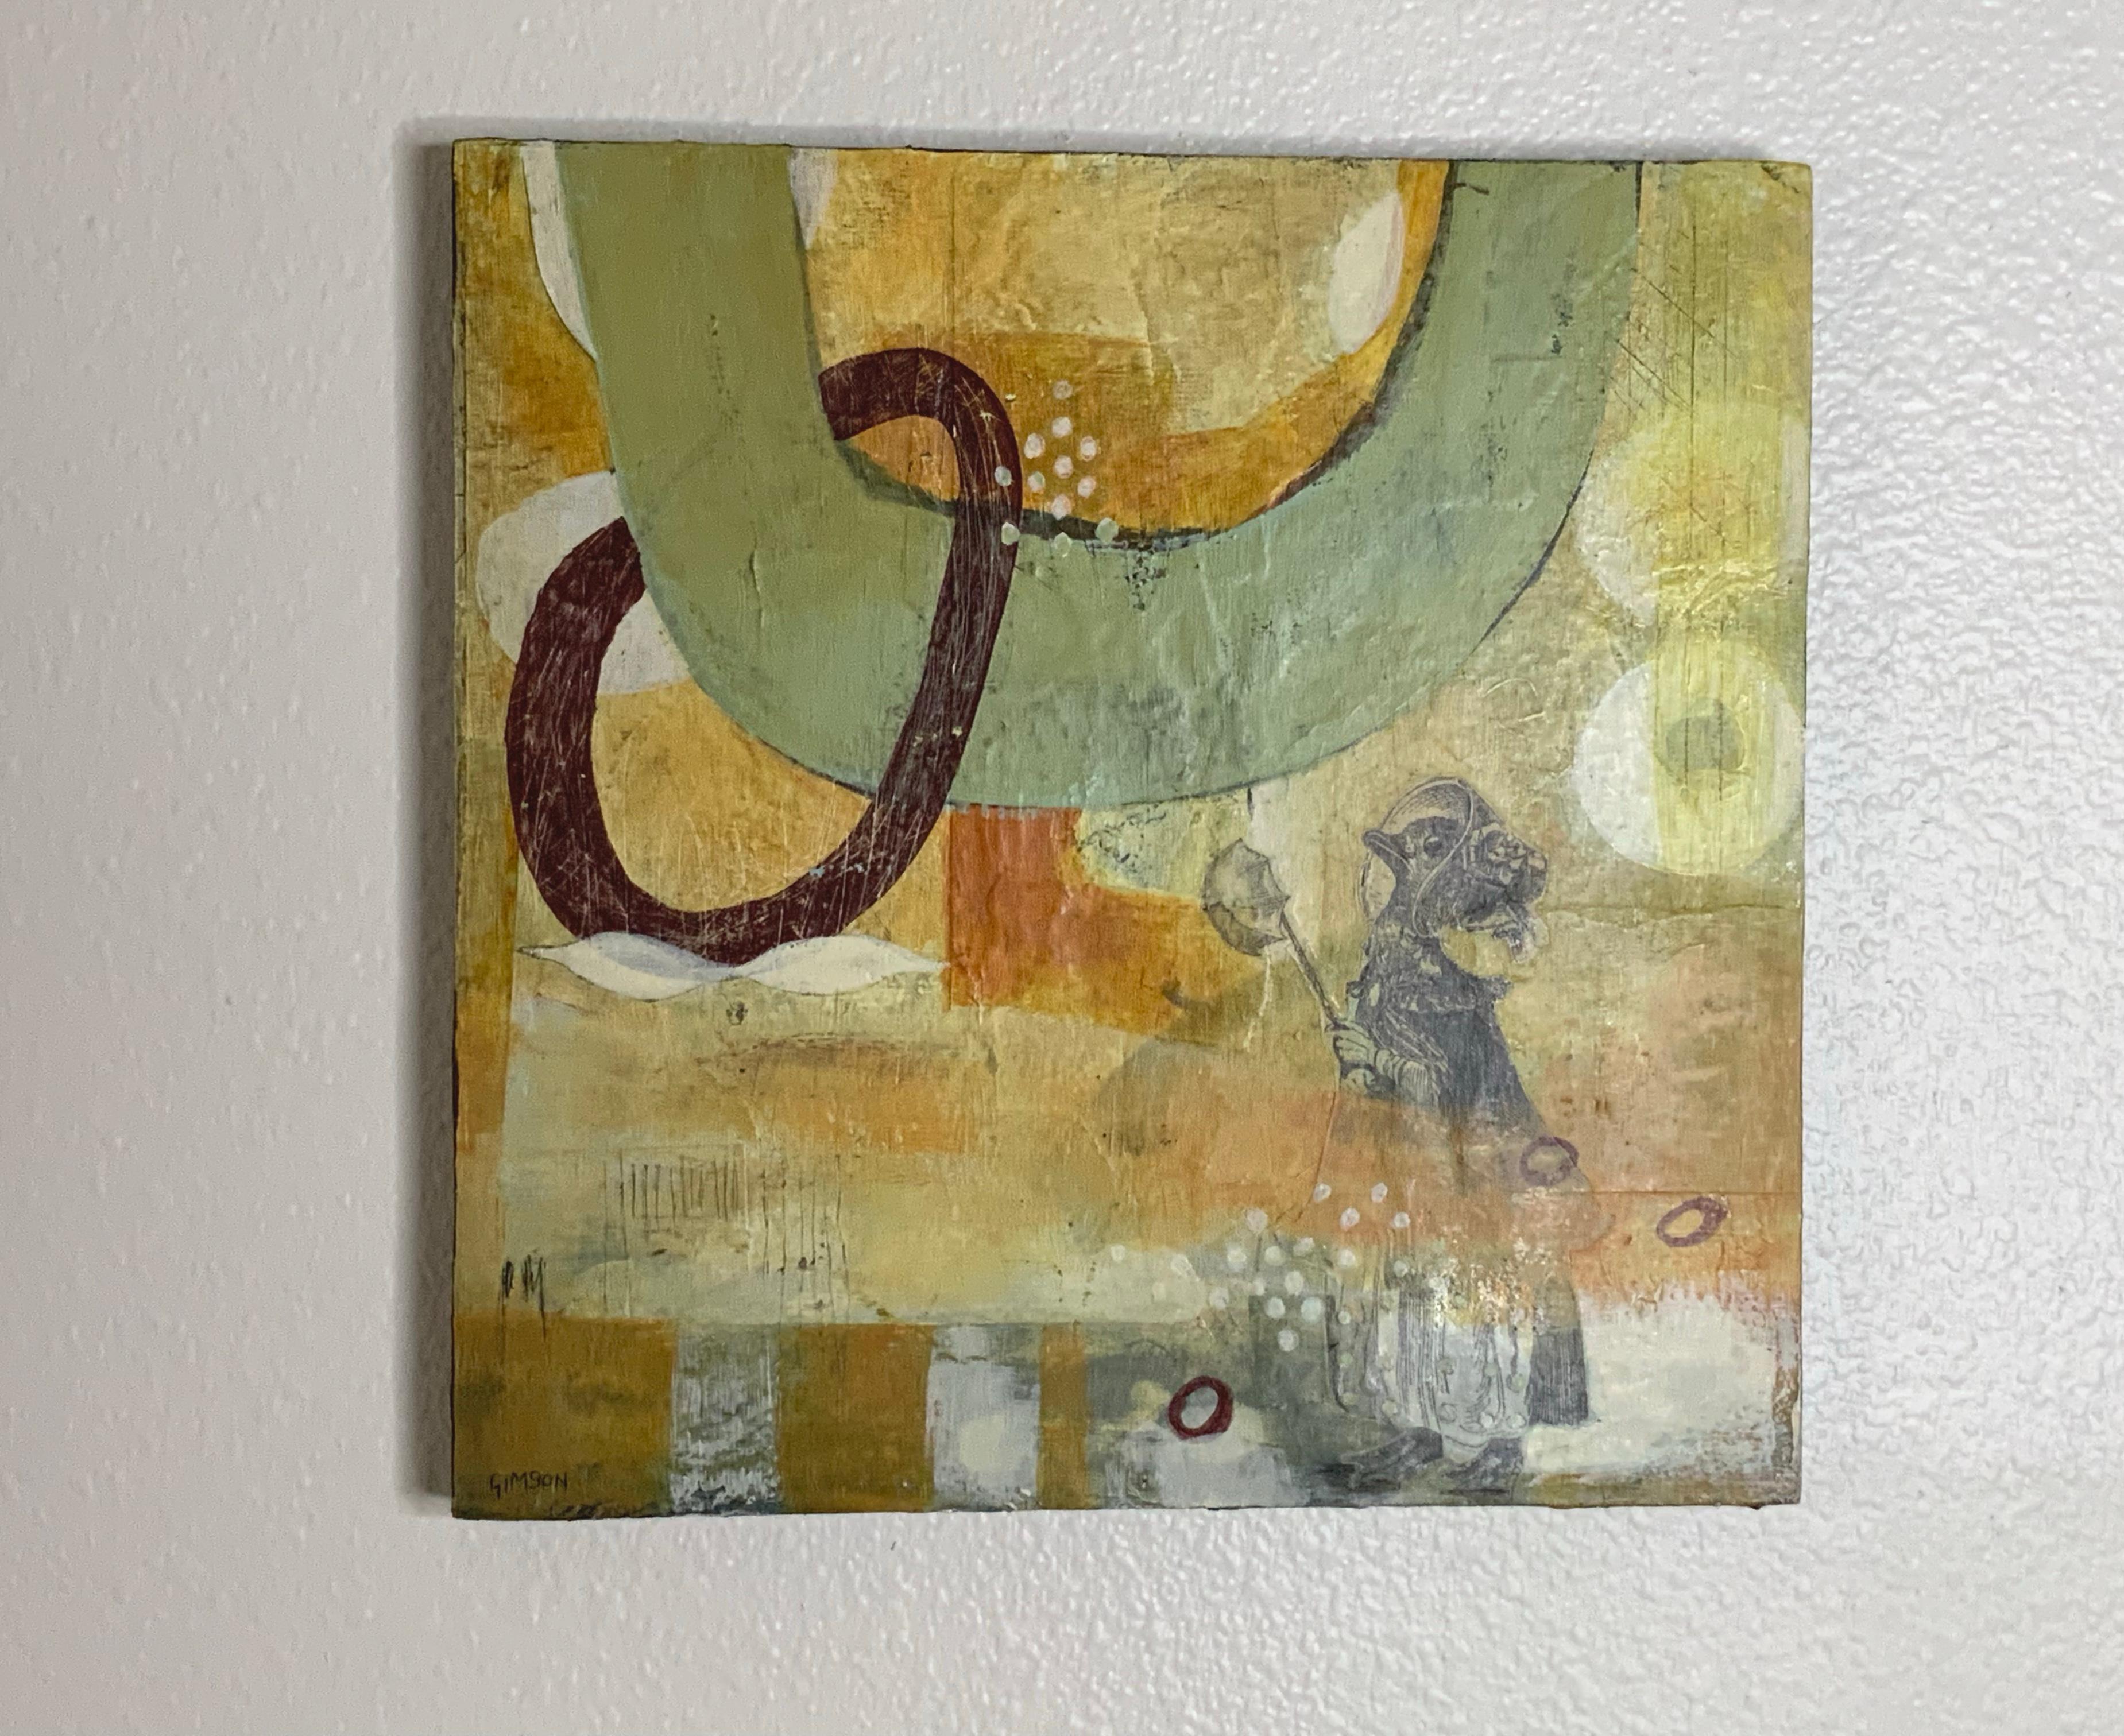 <p>Artist Comments<br>Artist Steph Gimson displays a charming duck wearing a prairie bonnet. She paints giant chains linking to each other in the abstract background. Circular patterns of different shapes and sizes scatter the composition. Part of